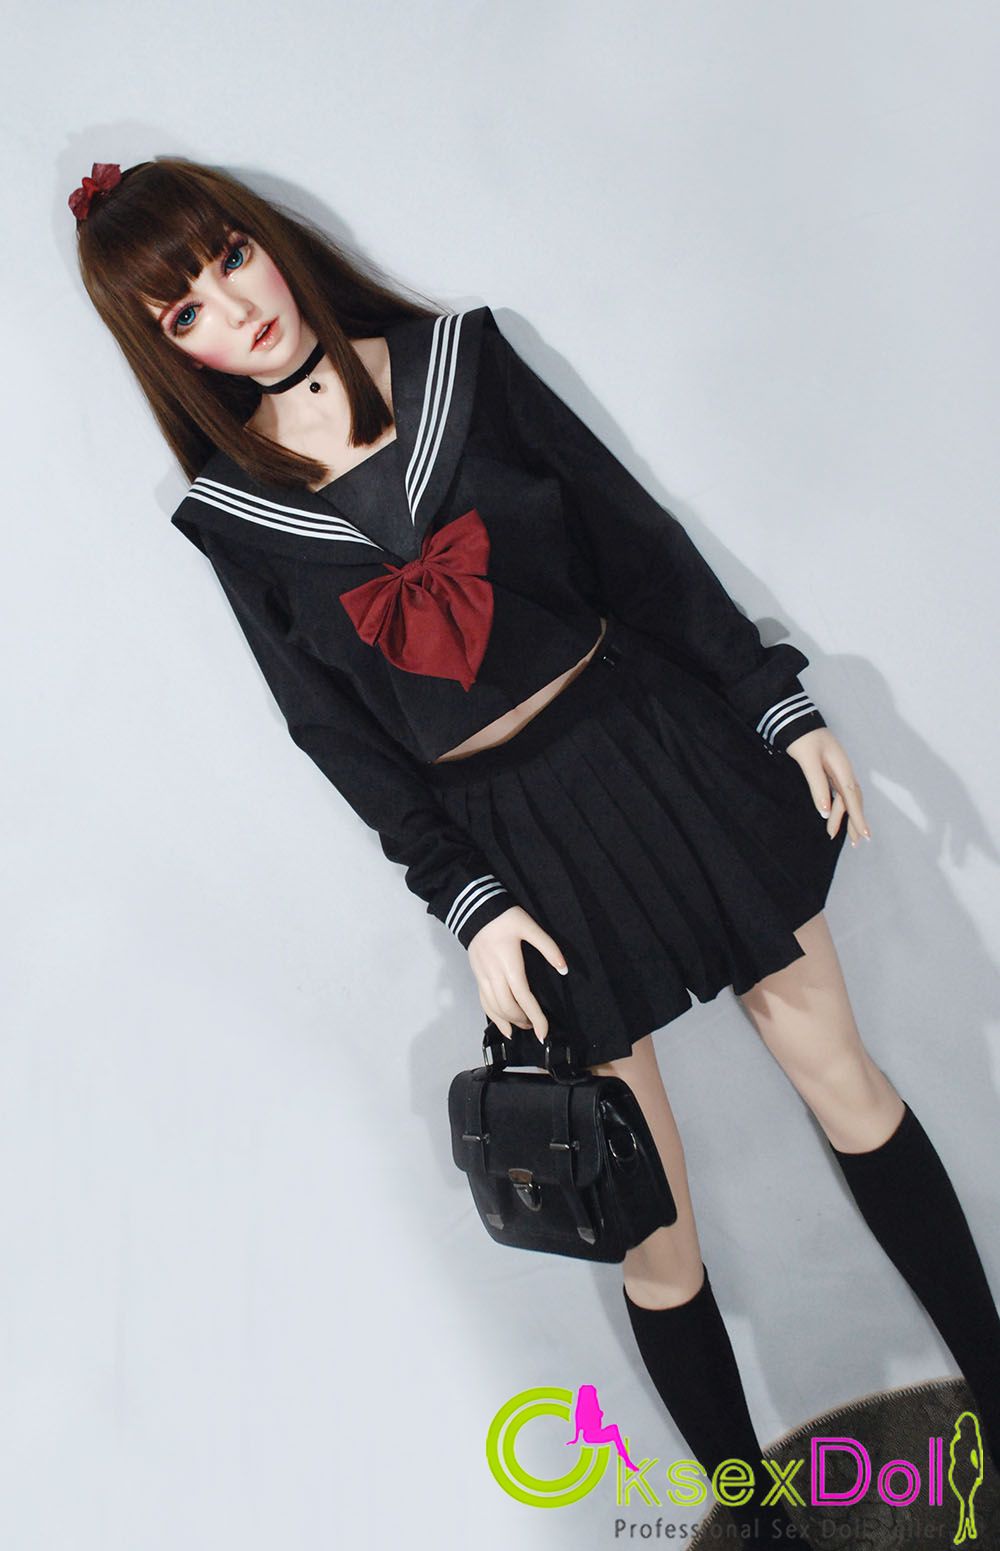 elsababe-doll.html B-cup Real Doll Pictures